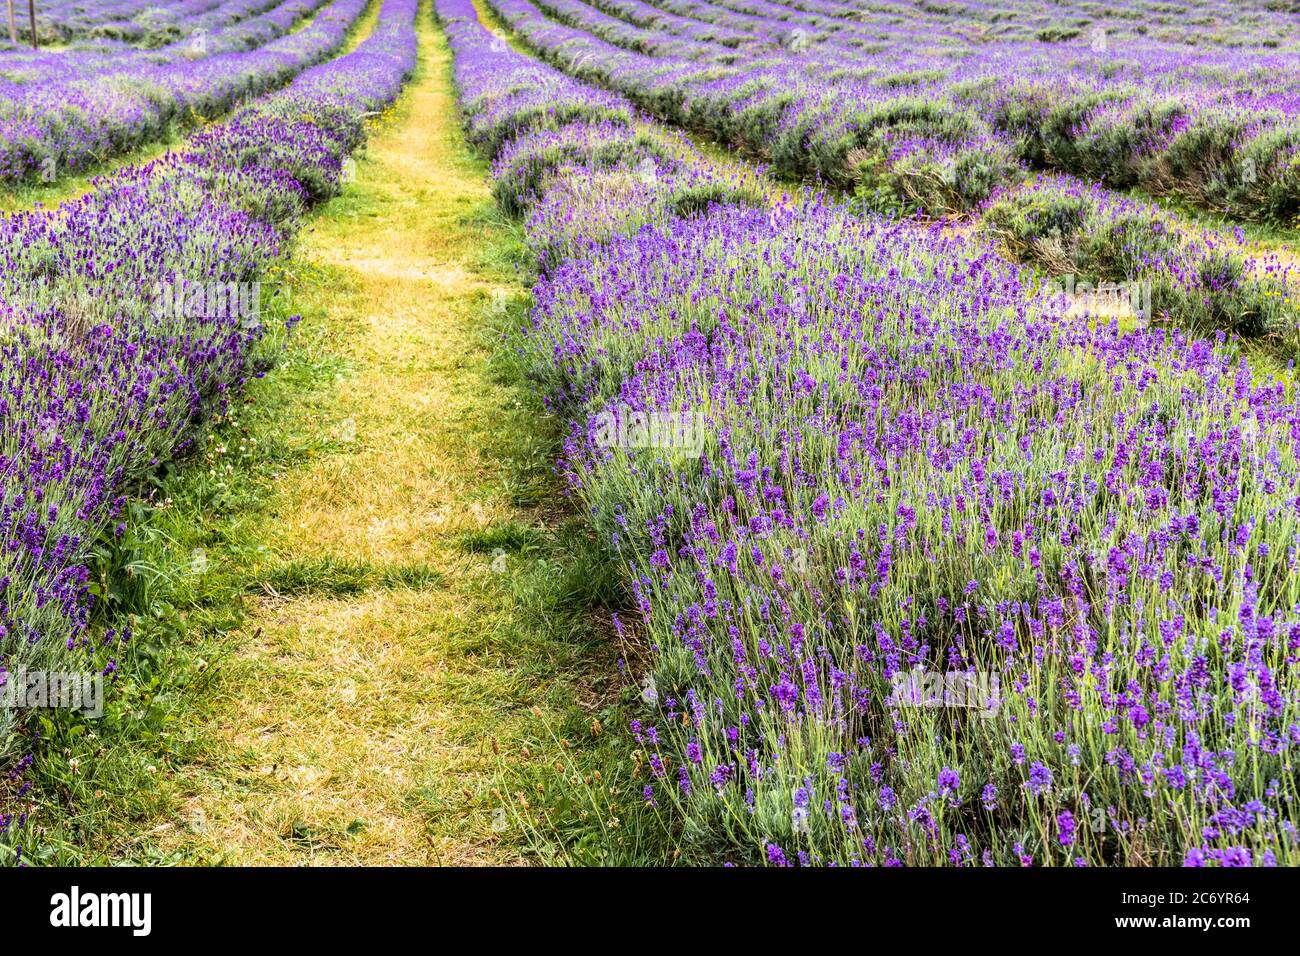 Lavender field with rows of purple flowers Stock Photo